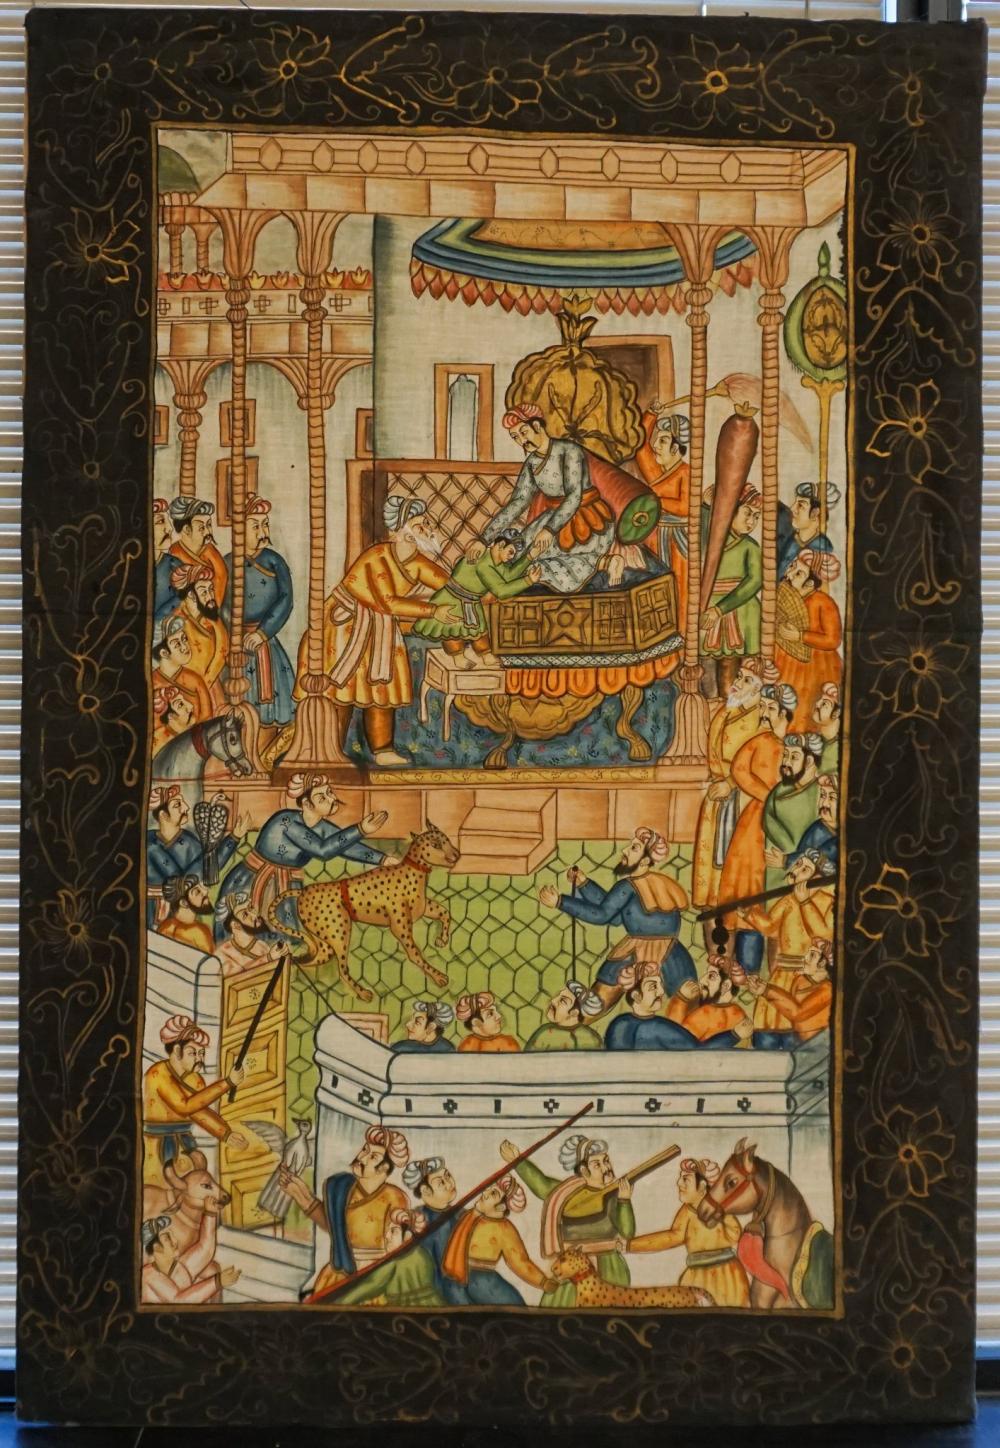 INDO-PERSIAN PAINTING OF MUGHAL